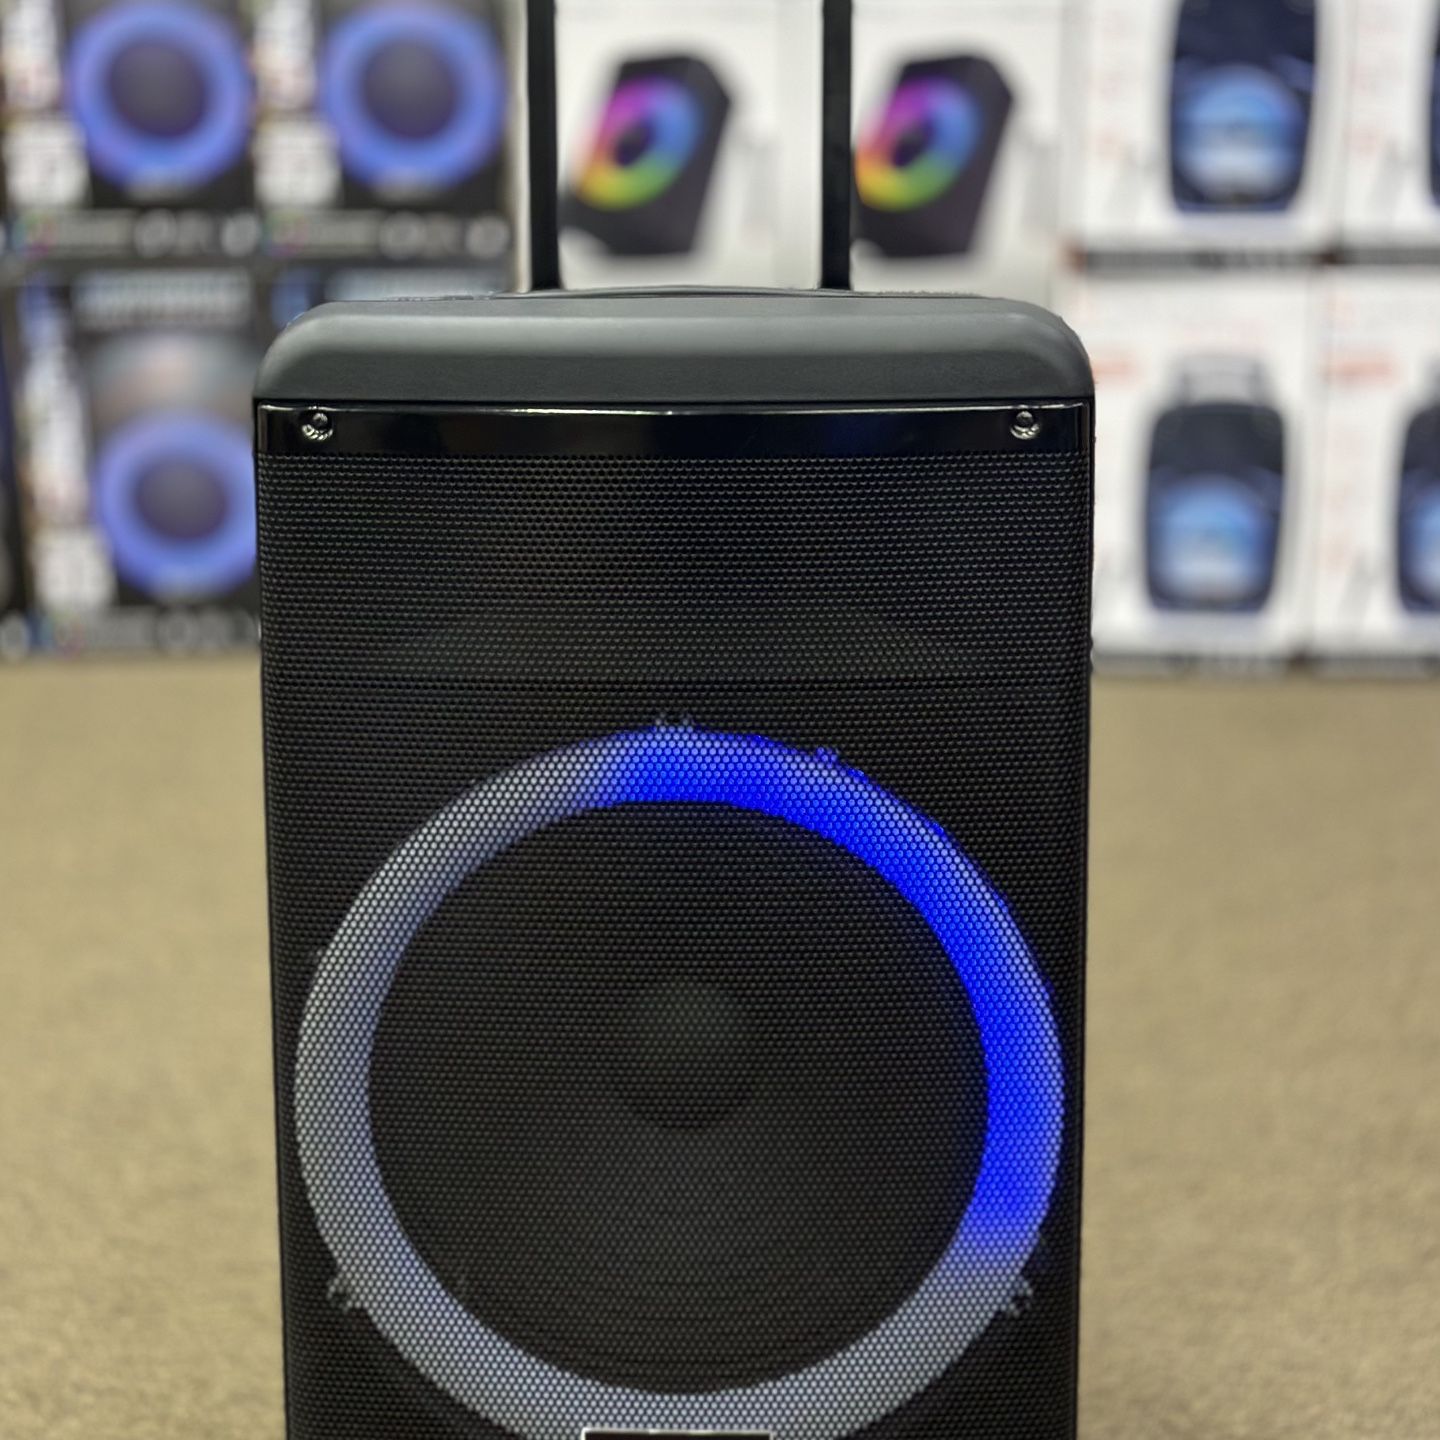 Experience the Ultimate Party Vibes with this 15’’ Woofer Bluetooth Speaker